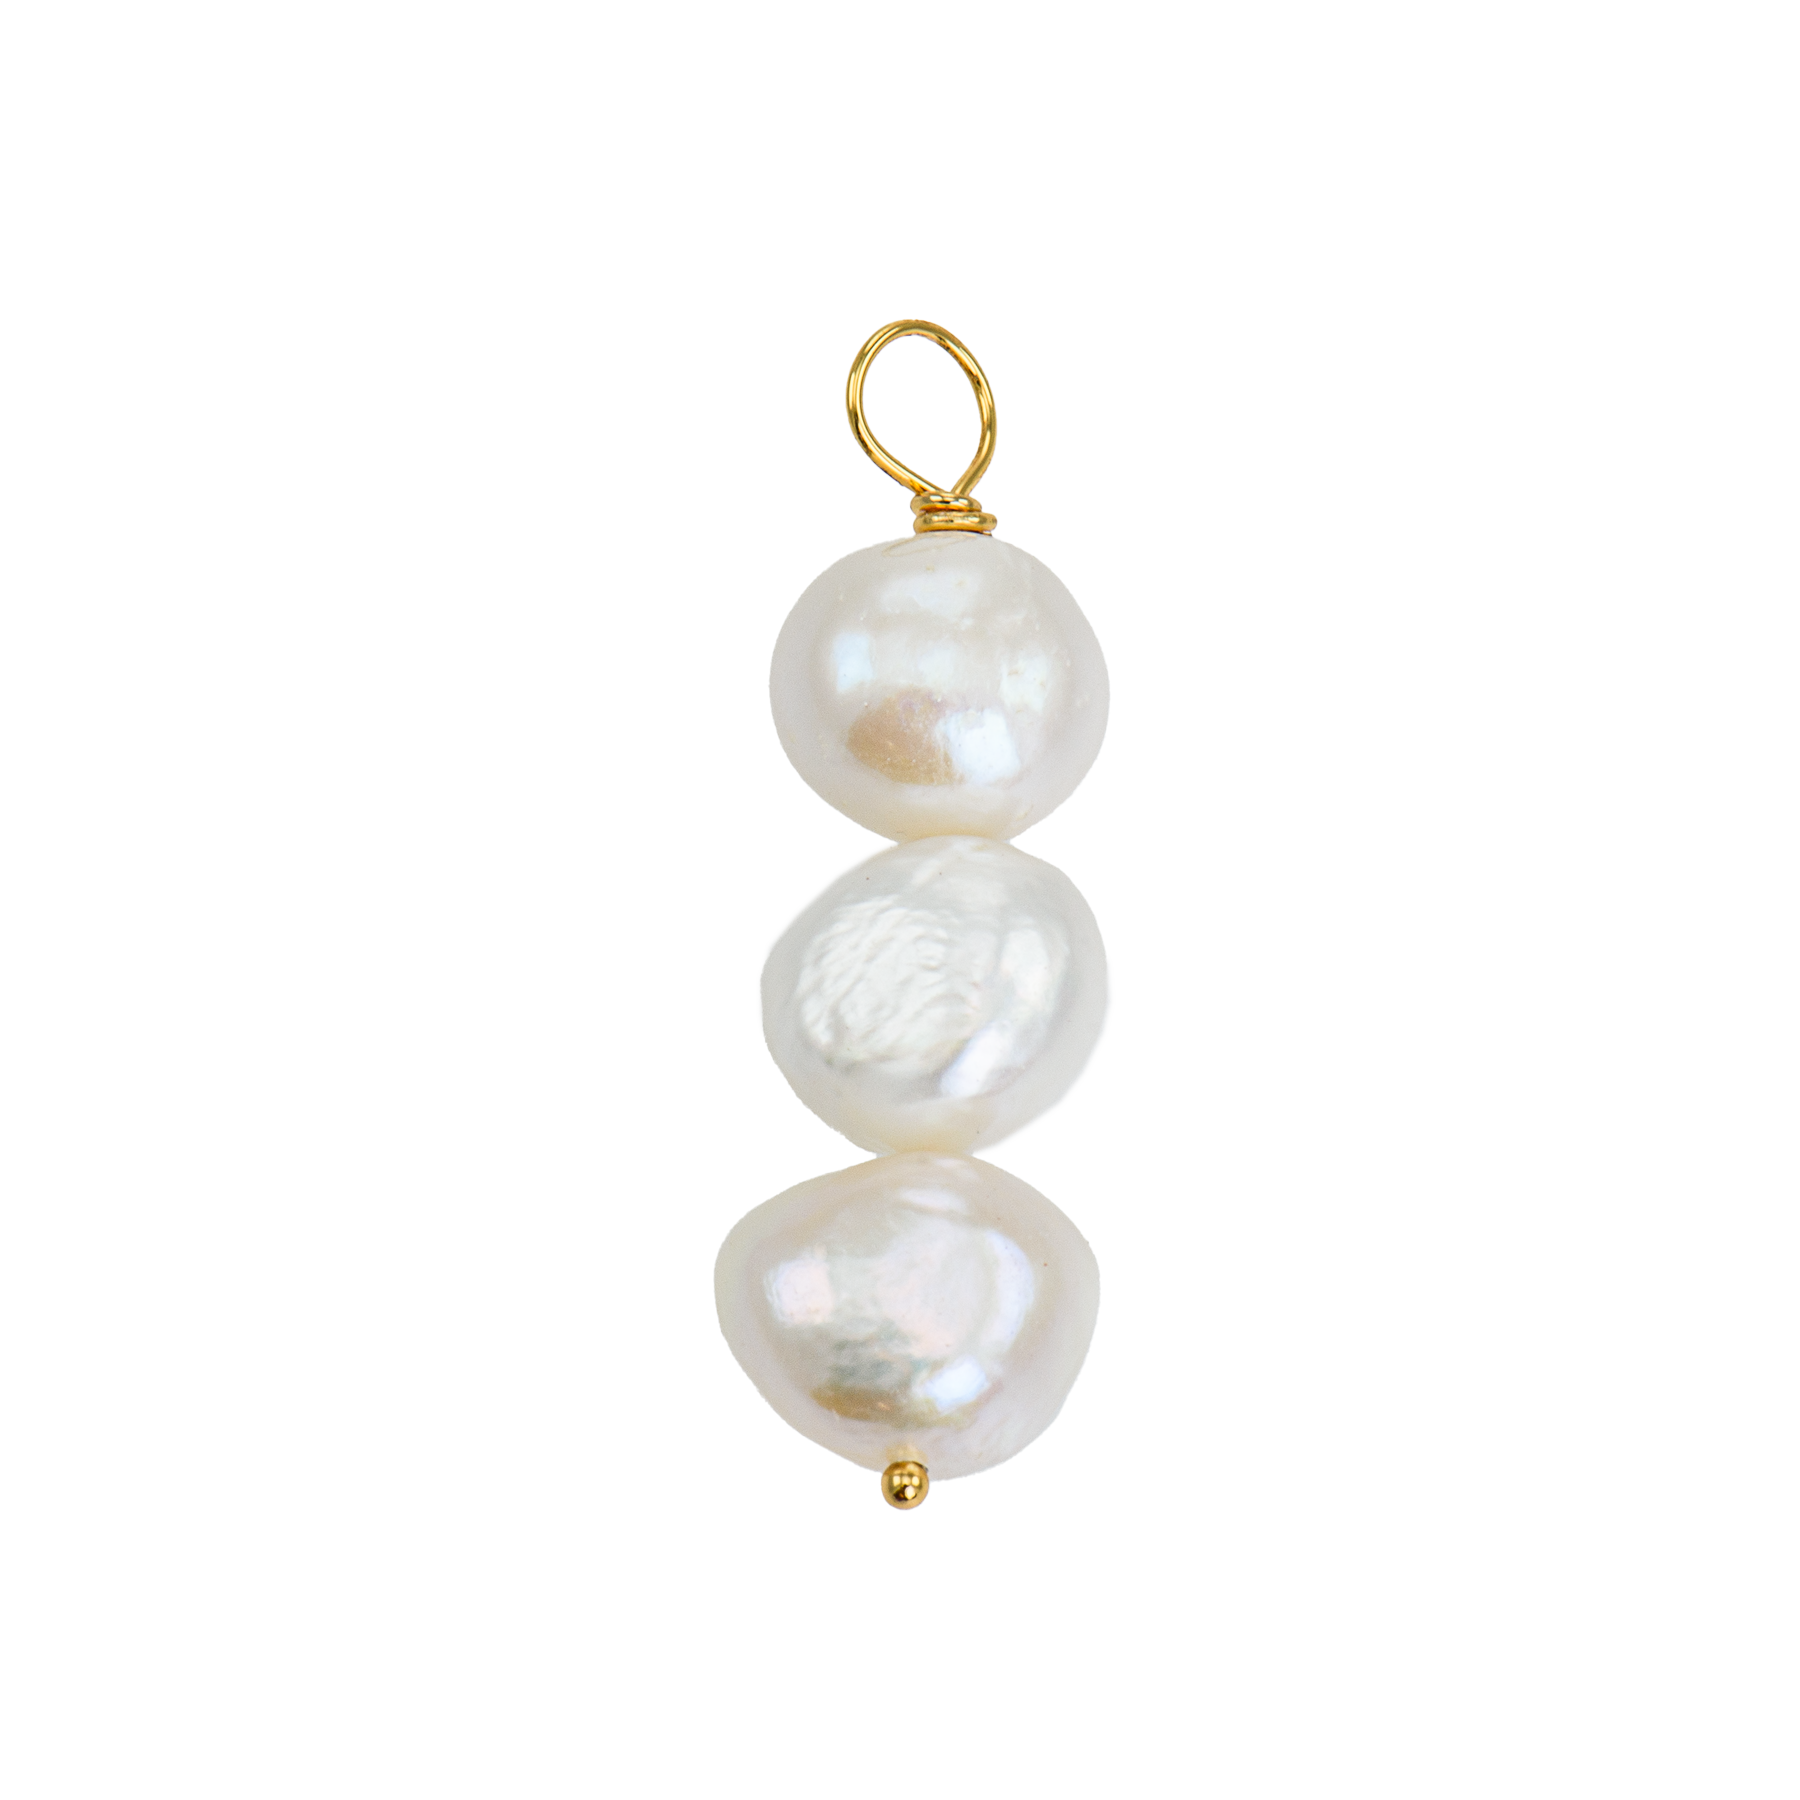 Image of Triple pearl charm from Emilia by Bon Dep